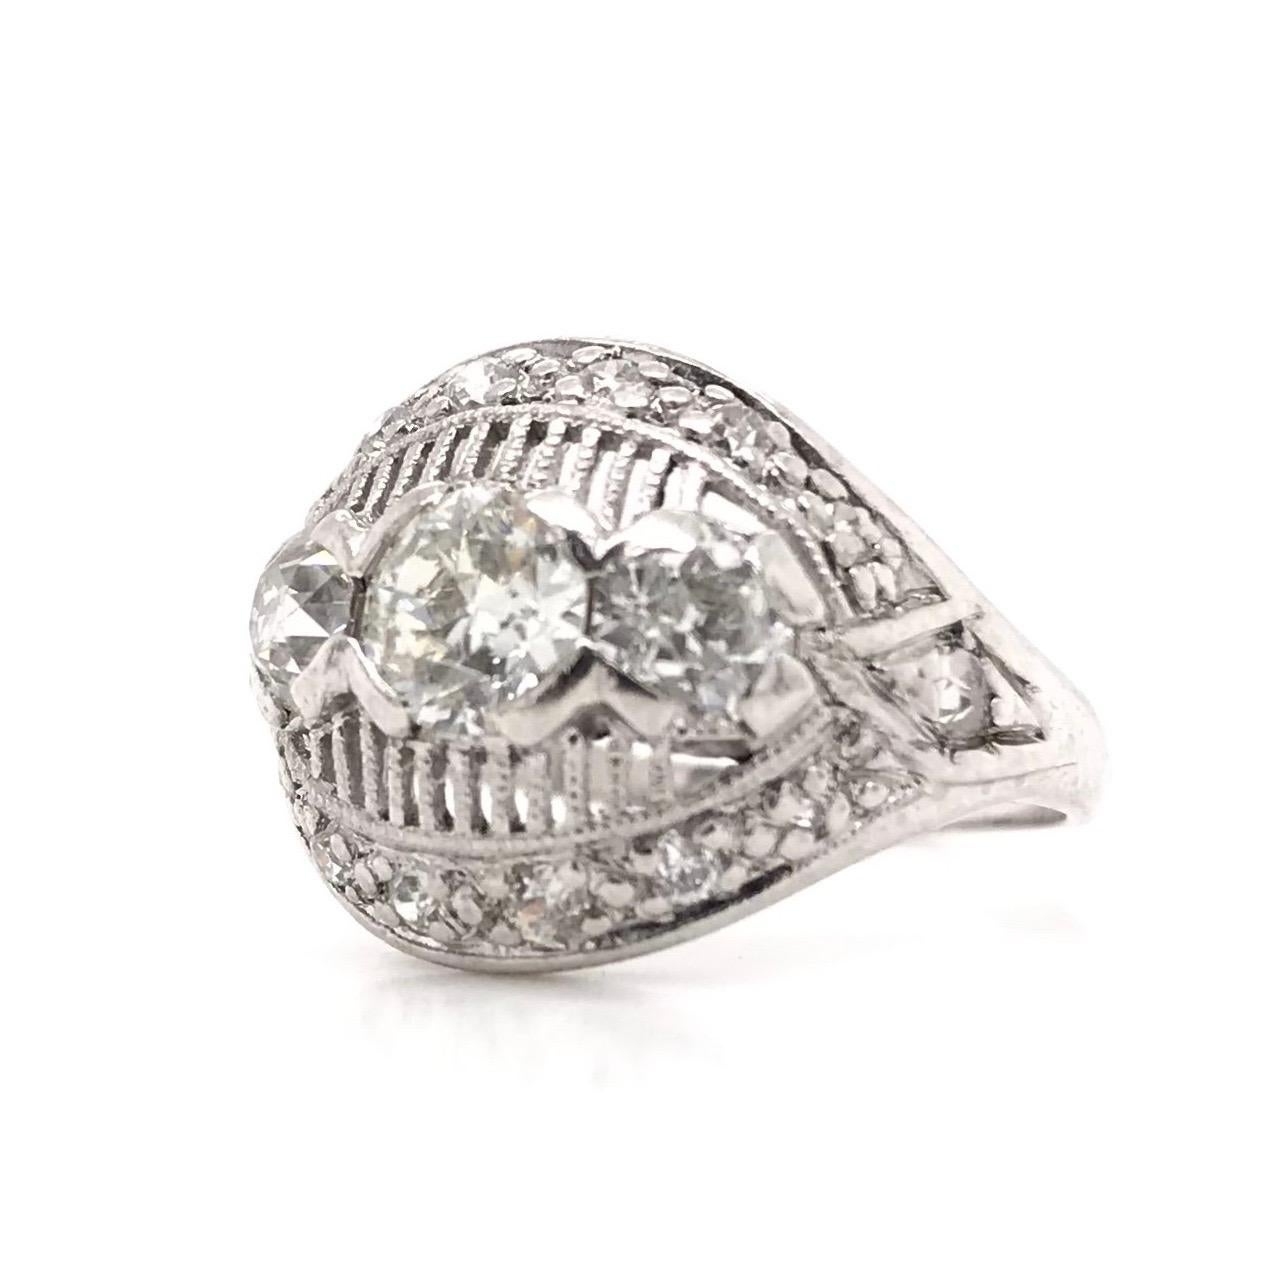 This vintage diamond ring was crafted sometime during the Mid Century design period ( 1940-1960 ). The piece features a 0.53 carat Old European Cut diamond in the center that grades approximately J in color, VS1 in clarity. The platinum setting